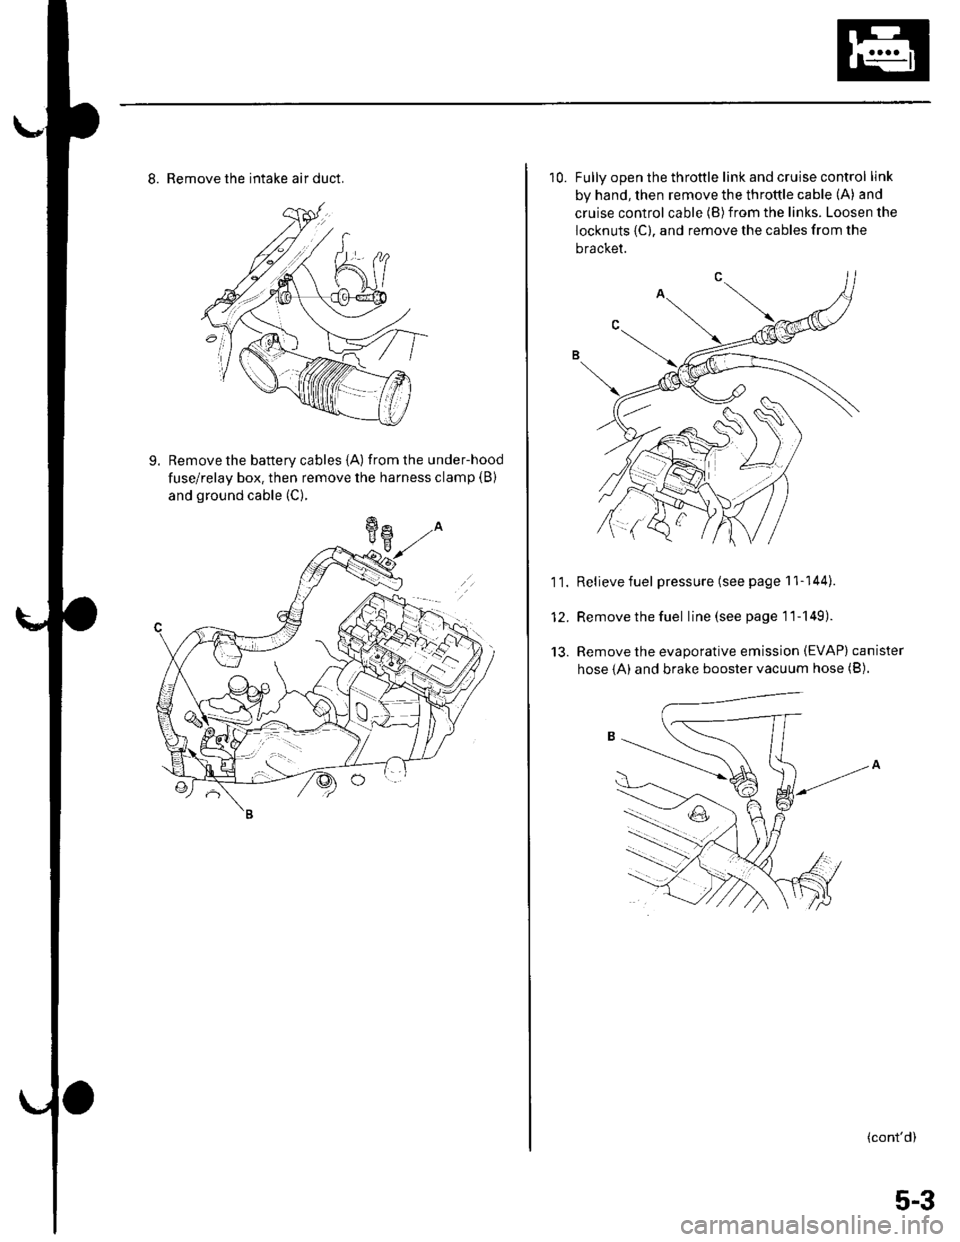 HONDA CIVIC 2002 7.G Workshop Manual 8. Remove the intake air duct.
9. Remove the battery cables {A) fromthe under-hood
fuse/relay box. then remove the harness clamp (B)
and ground cable (C).
10. Fullv ooen the throttle link and cruise c